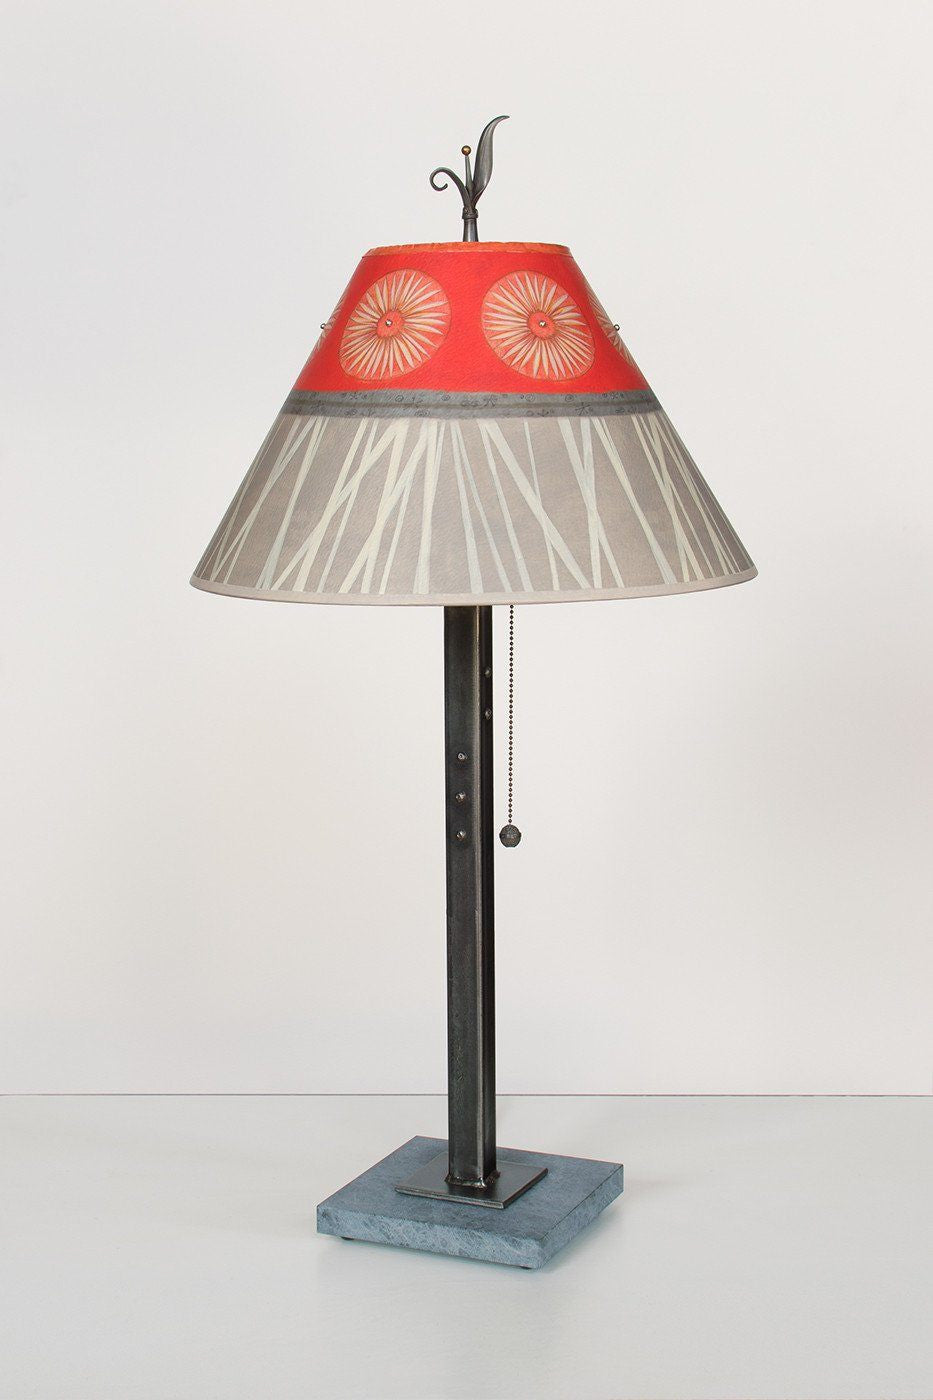 Janna Ugone & Co Table Lamps Steel Table Lamp with Medium Conical Shade in Tang